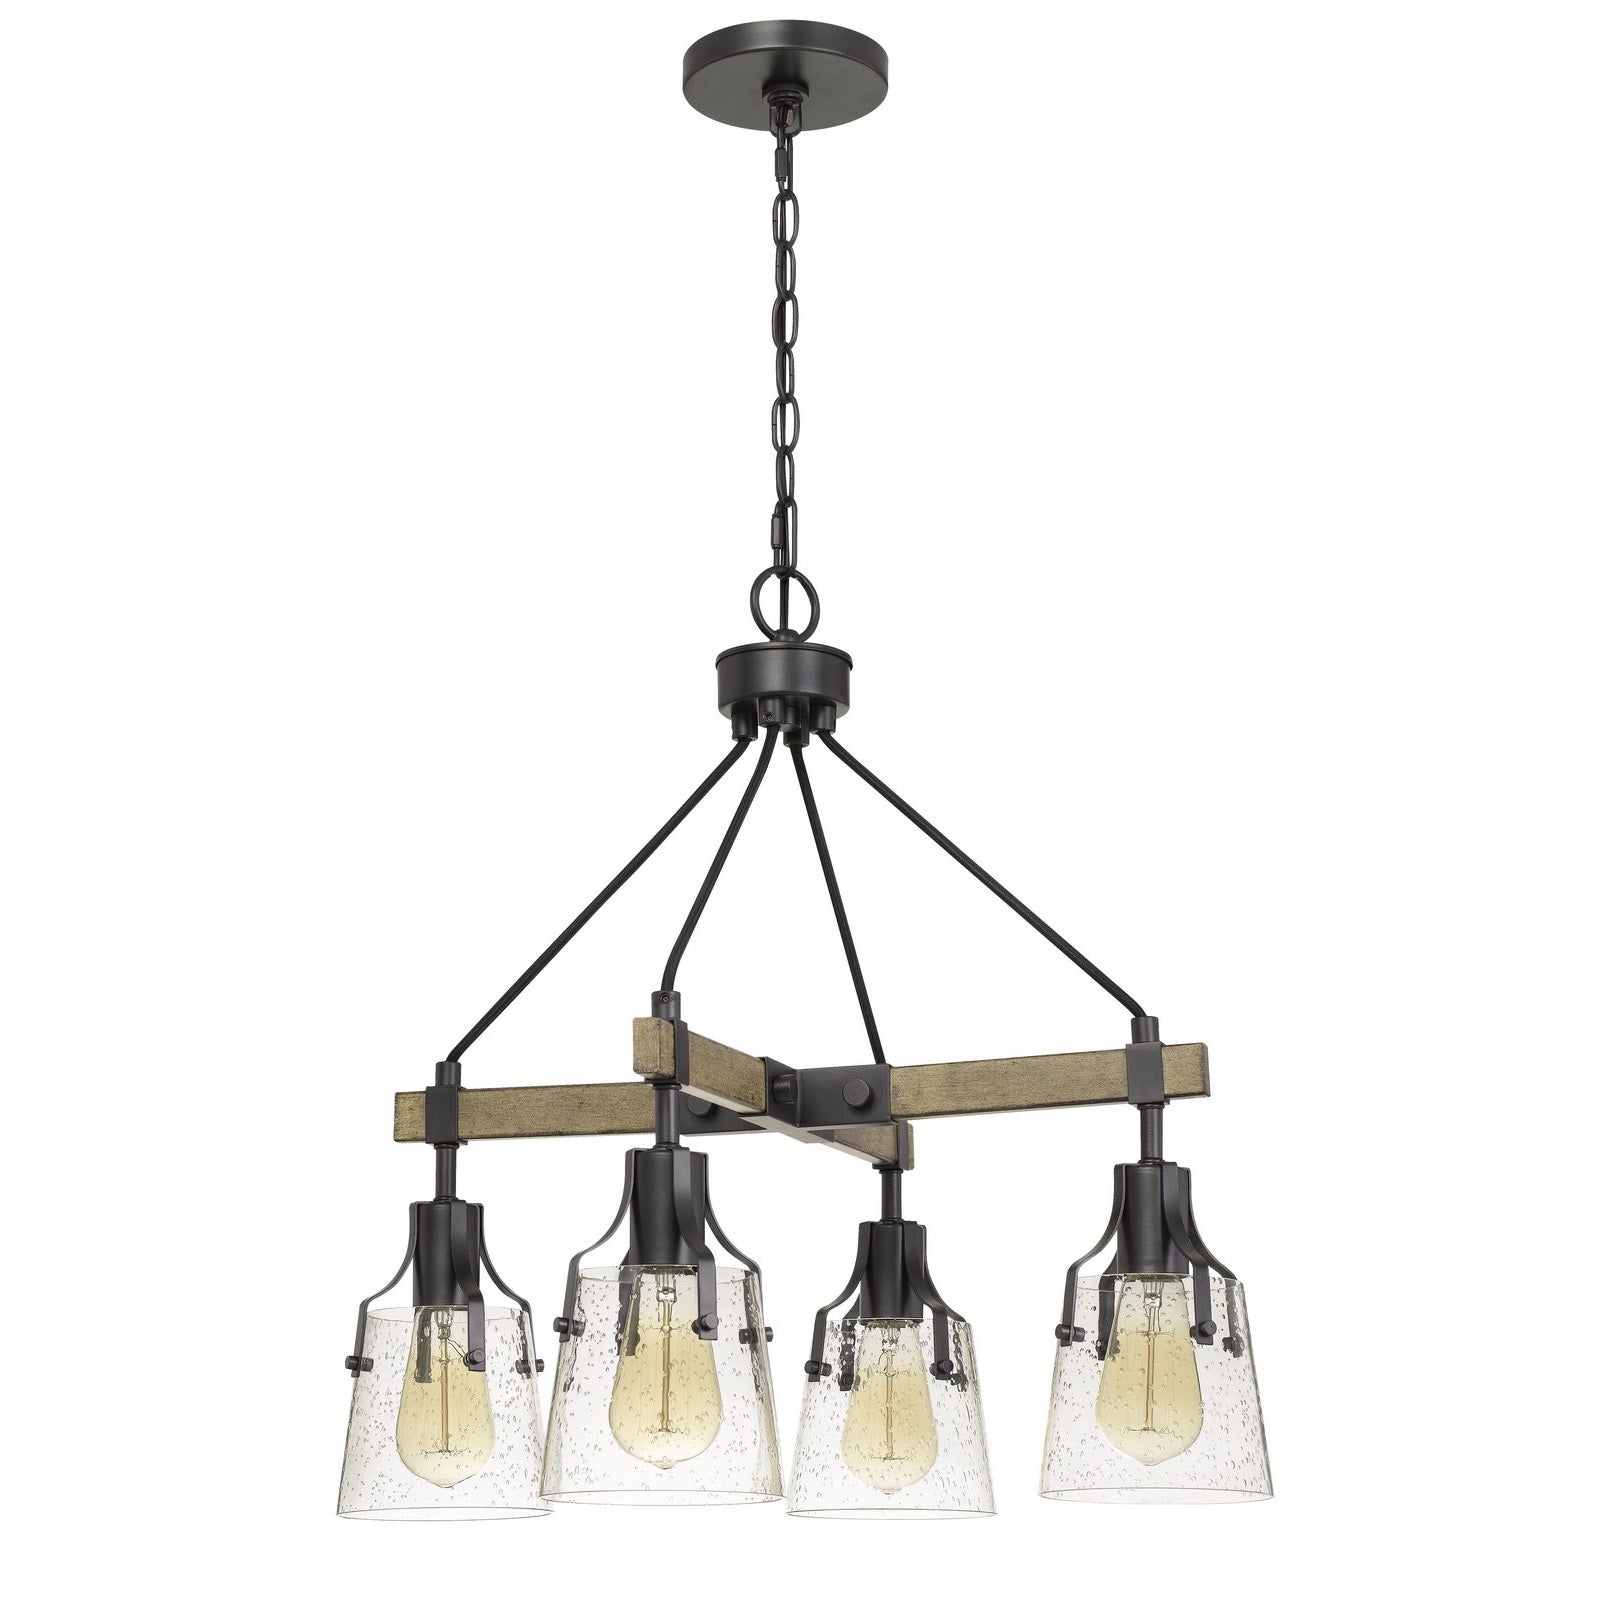 60W X 4 Aosta Metal Chandelier With Bubbled Glass Shades (Edison Bulbs Are Not Included)